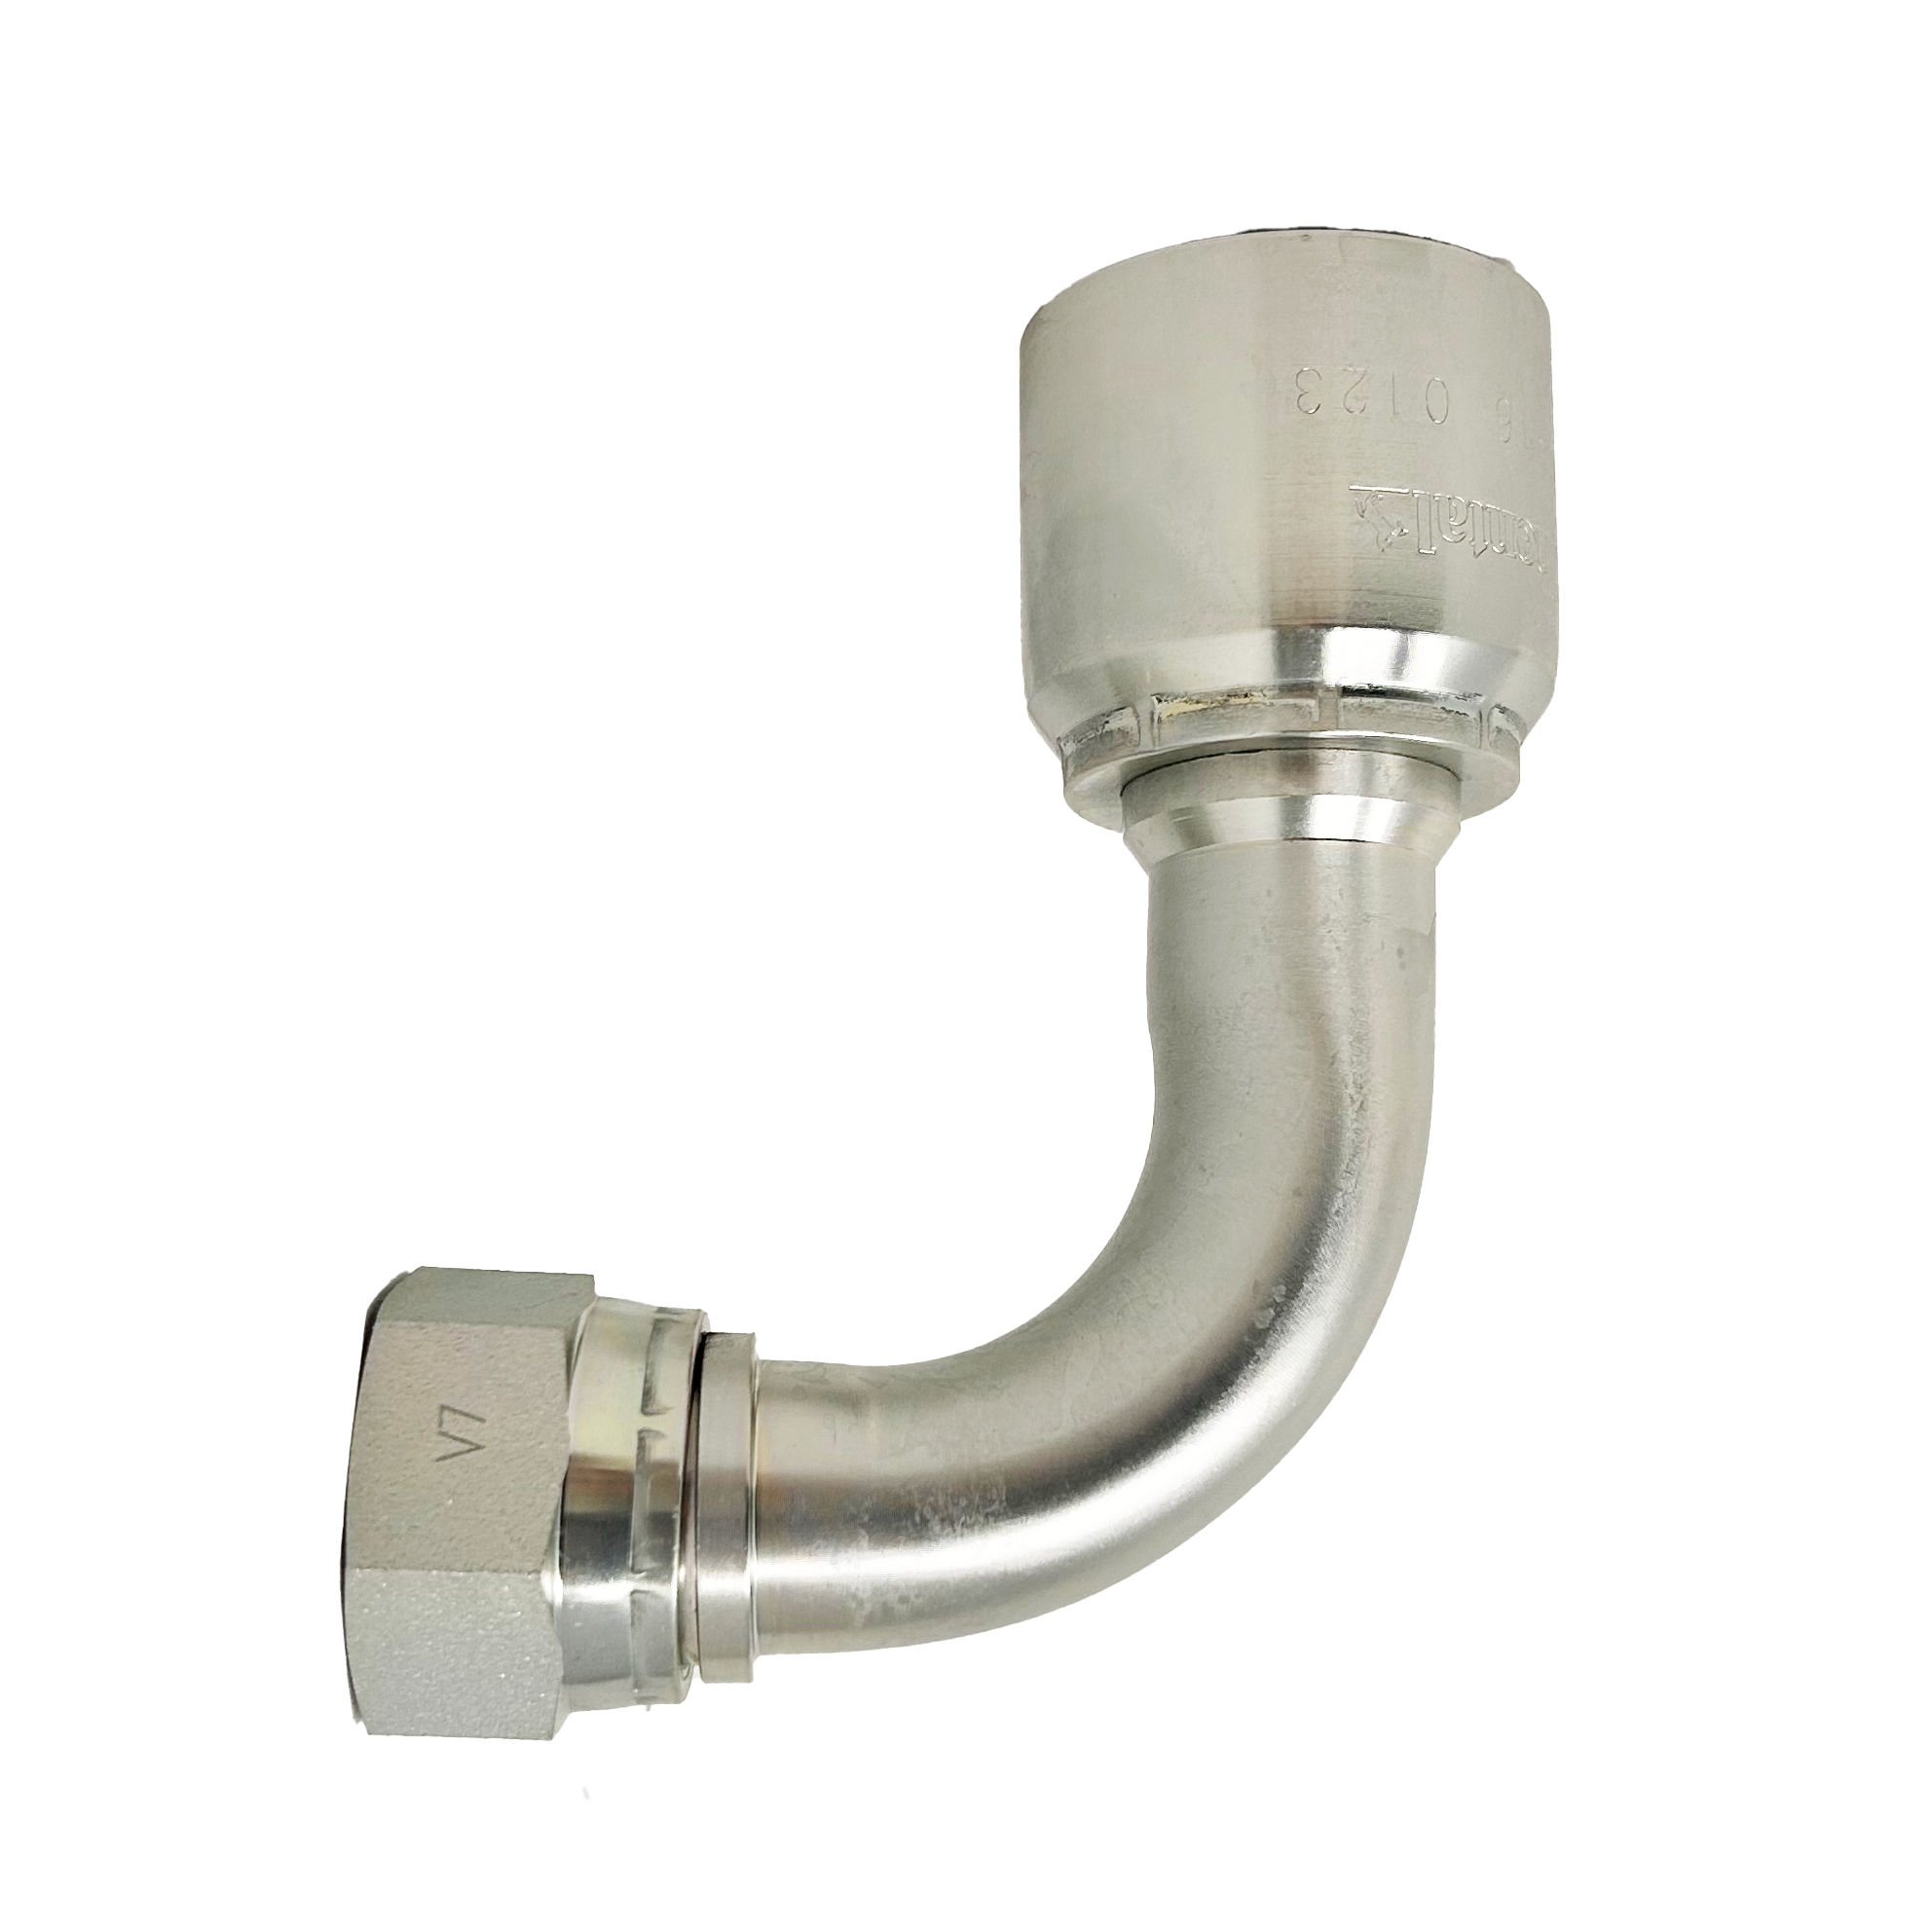 B2-JCFX90-0806: Continental Hose Fitting, 0.5 (1/2") Hose ID x 9/16-18 Female JIC, 90-Degree Swivel Connection